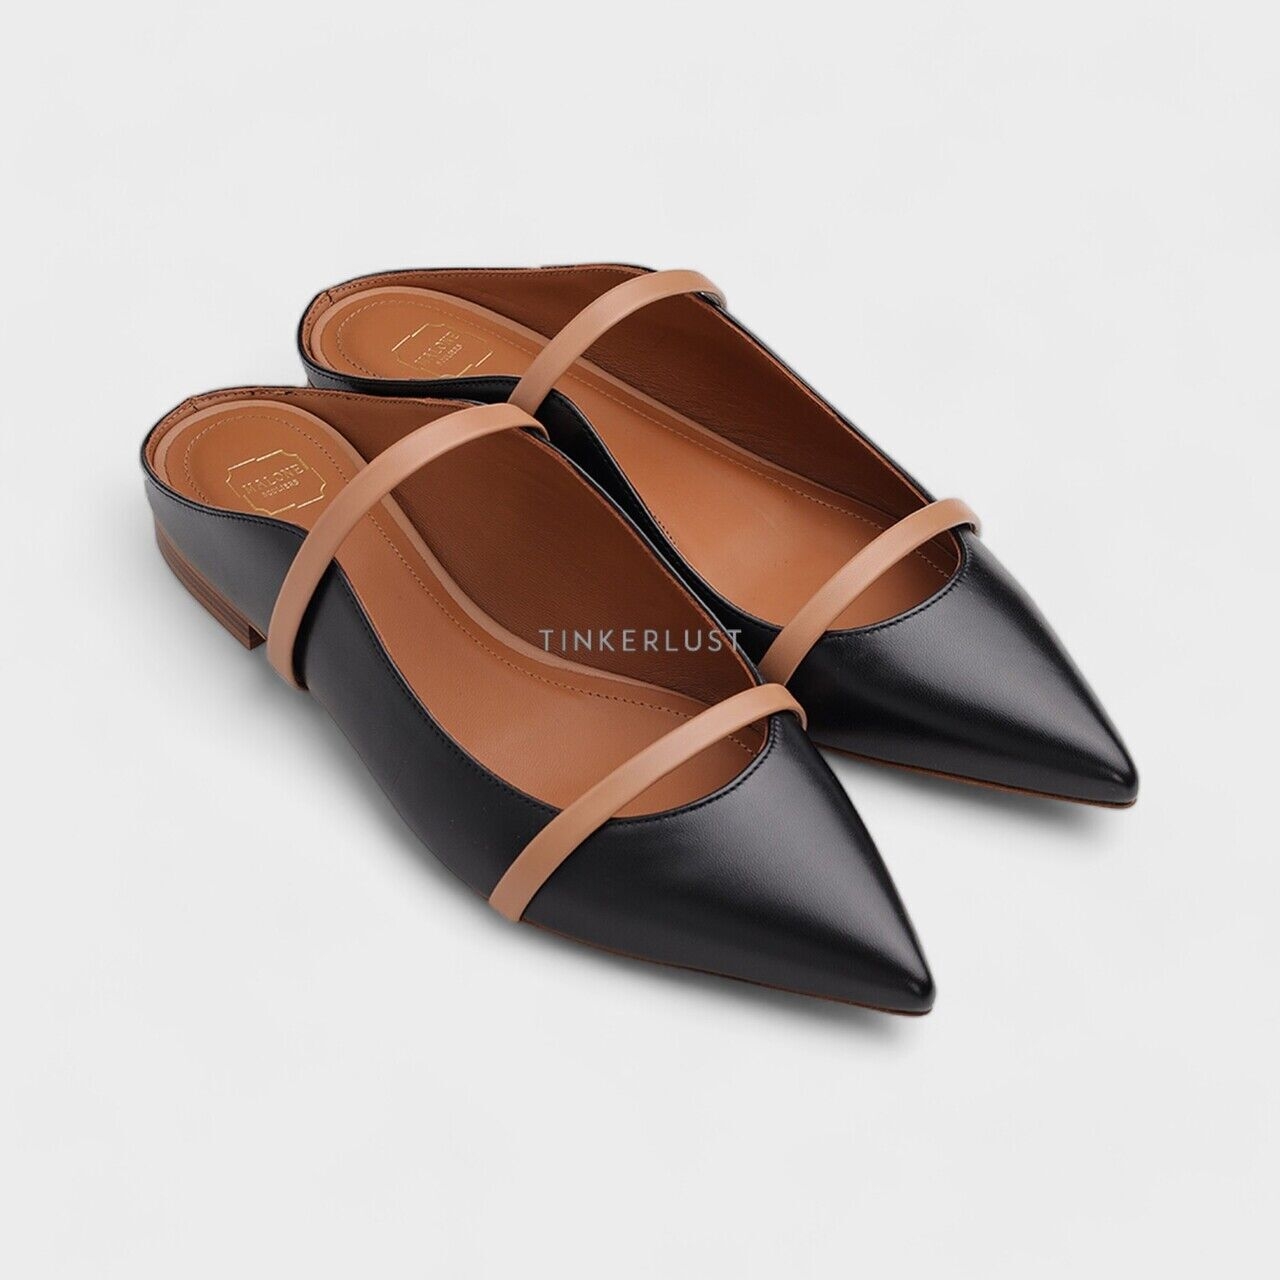 Malone Souliers in Black/Nude Maureen Mules Flats